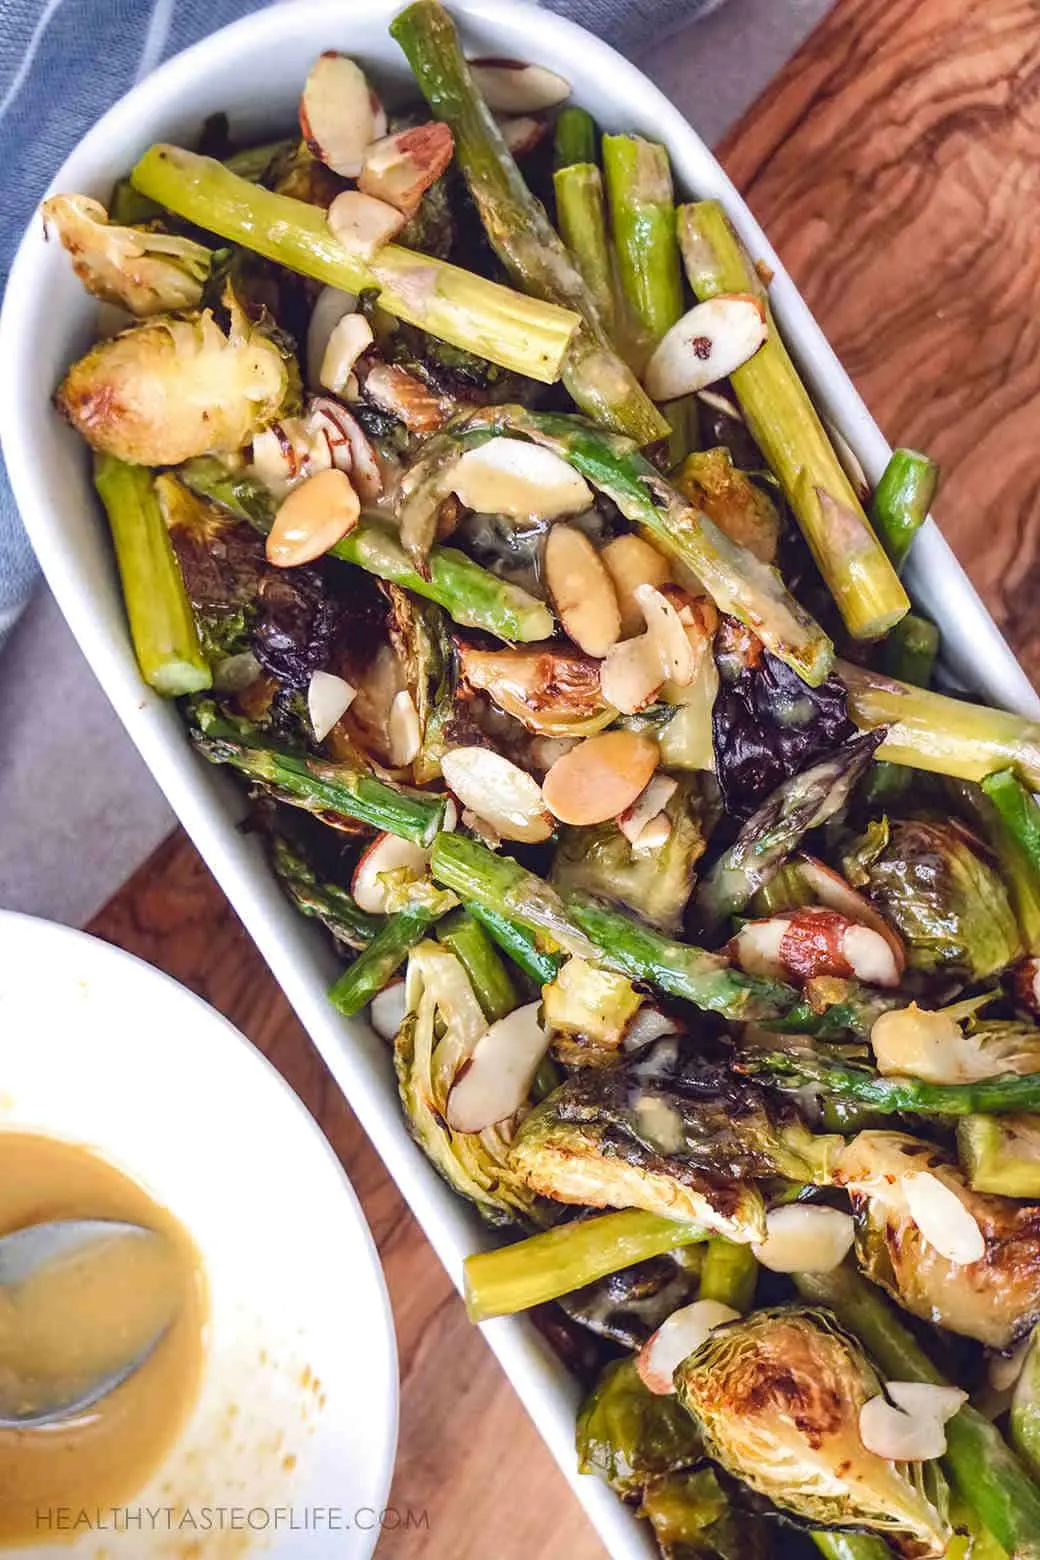 Crispy oven roasted Brussels sprouts asparagus and toasted almonds baked to perfect golden brown and served with a maple lemon Dijon mustard sauce for an extra kick